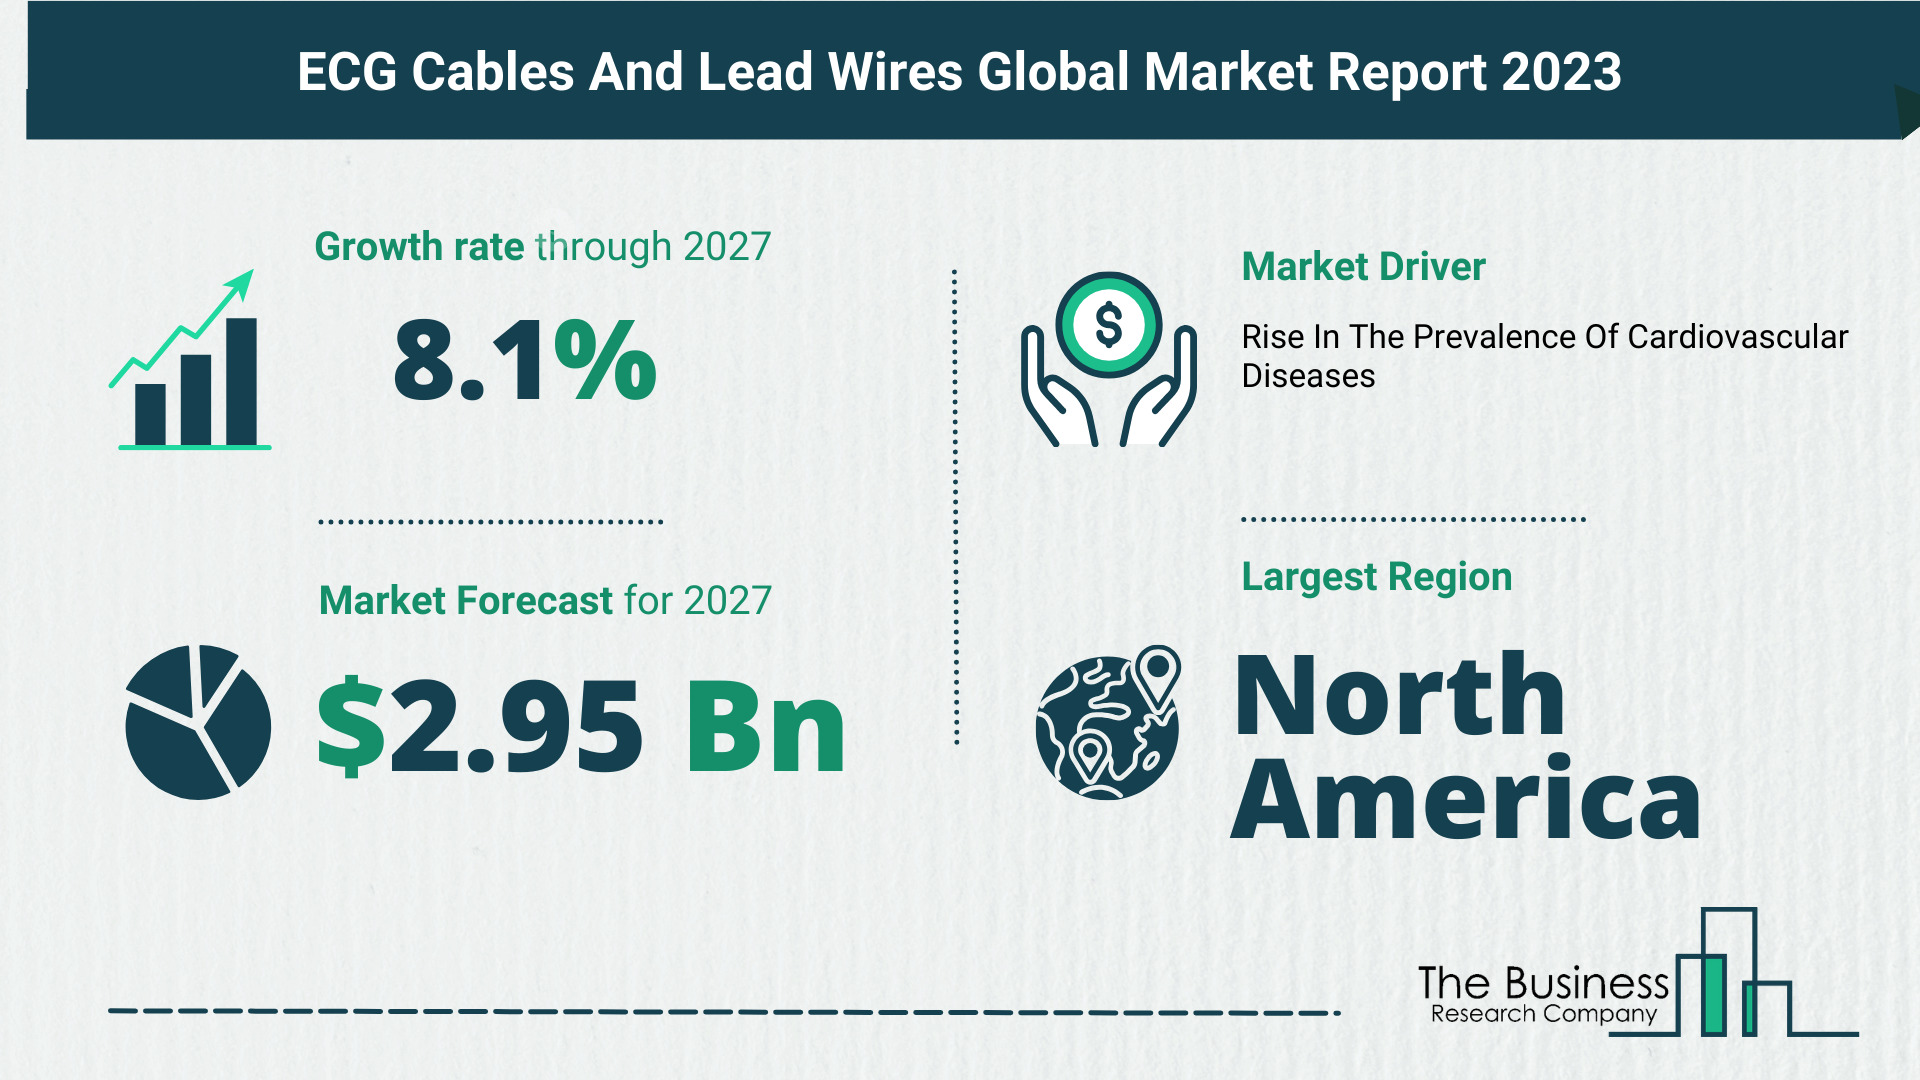 Global ECG Cables And Lead Wires Market